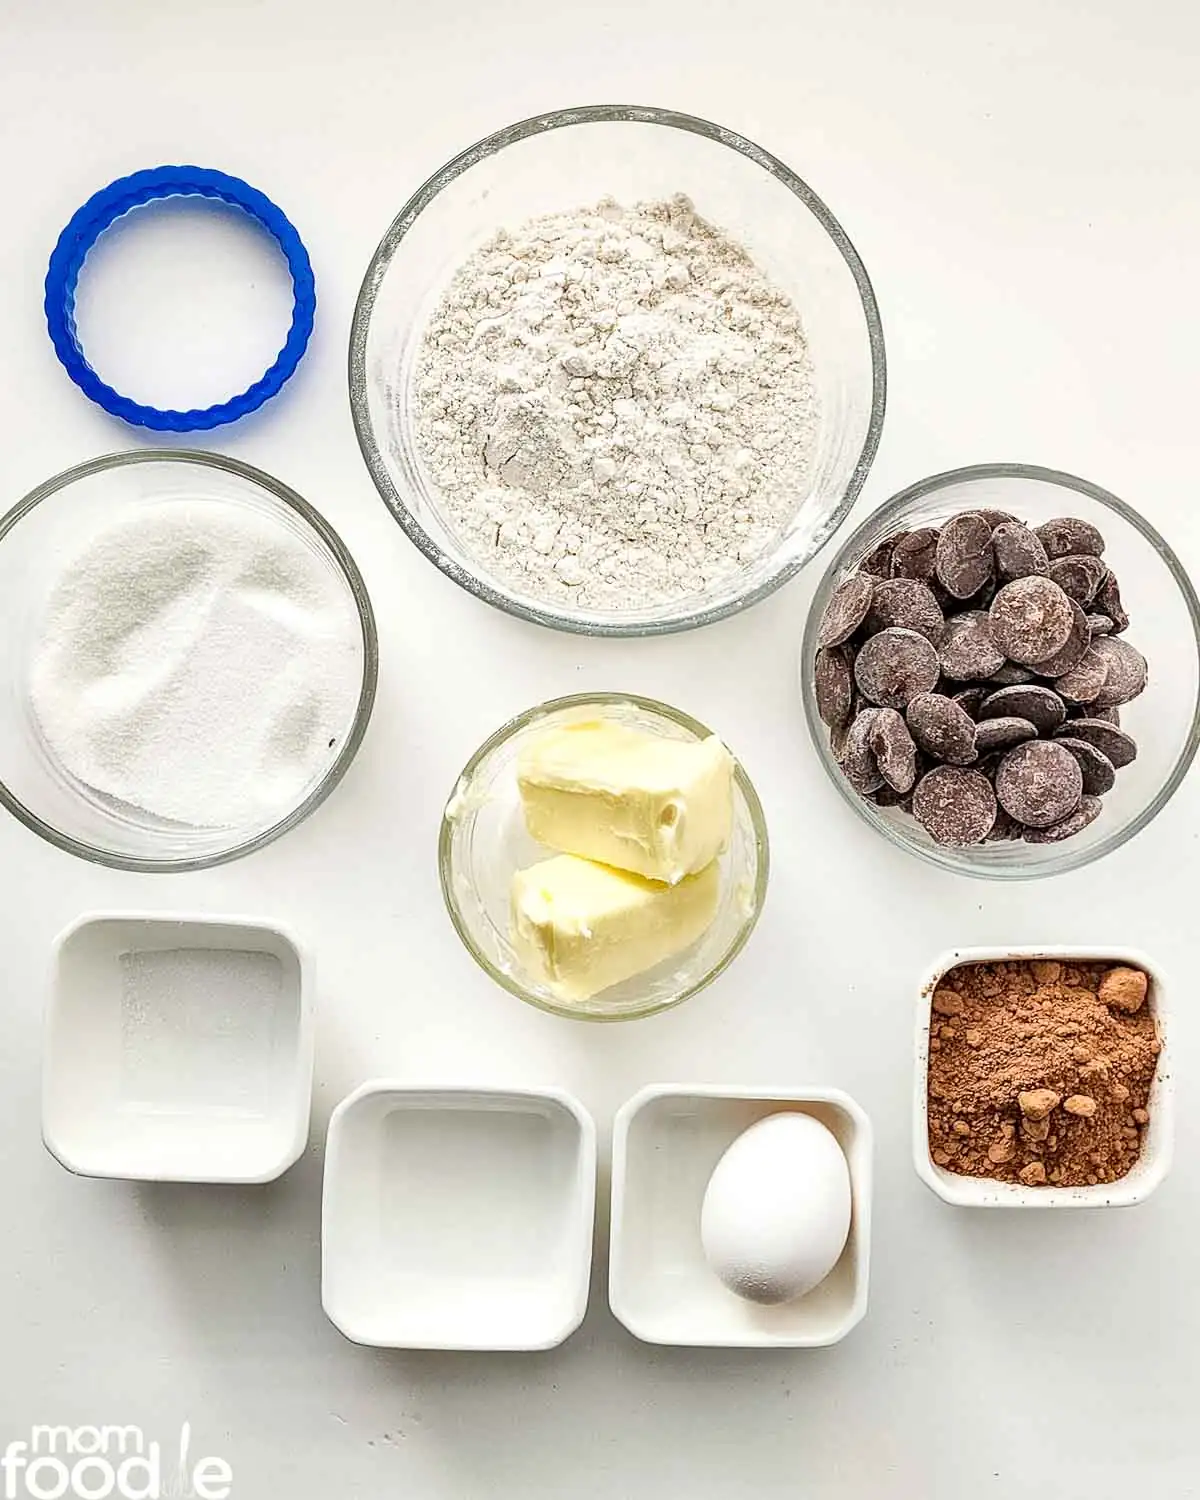 Ingredients for Thin Mints.